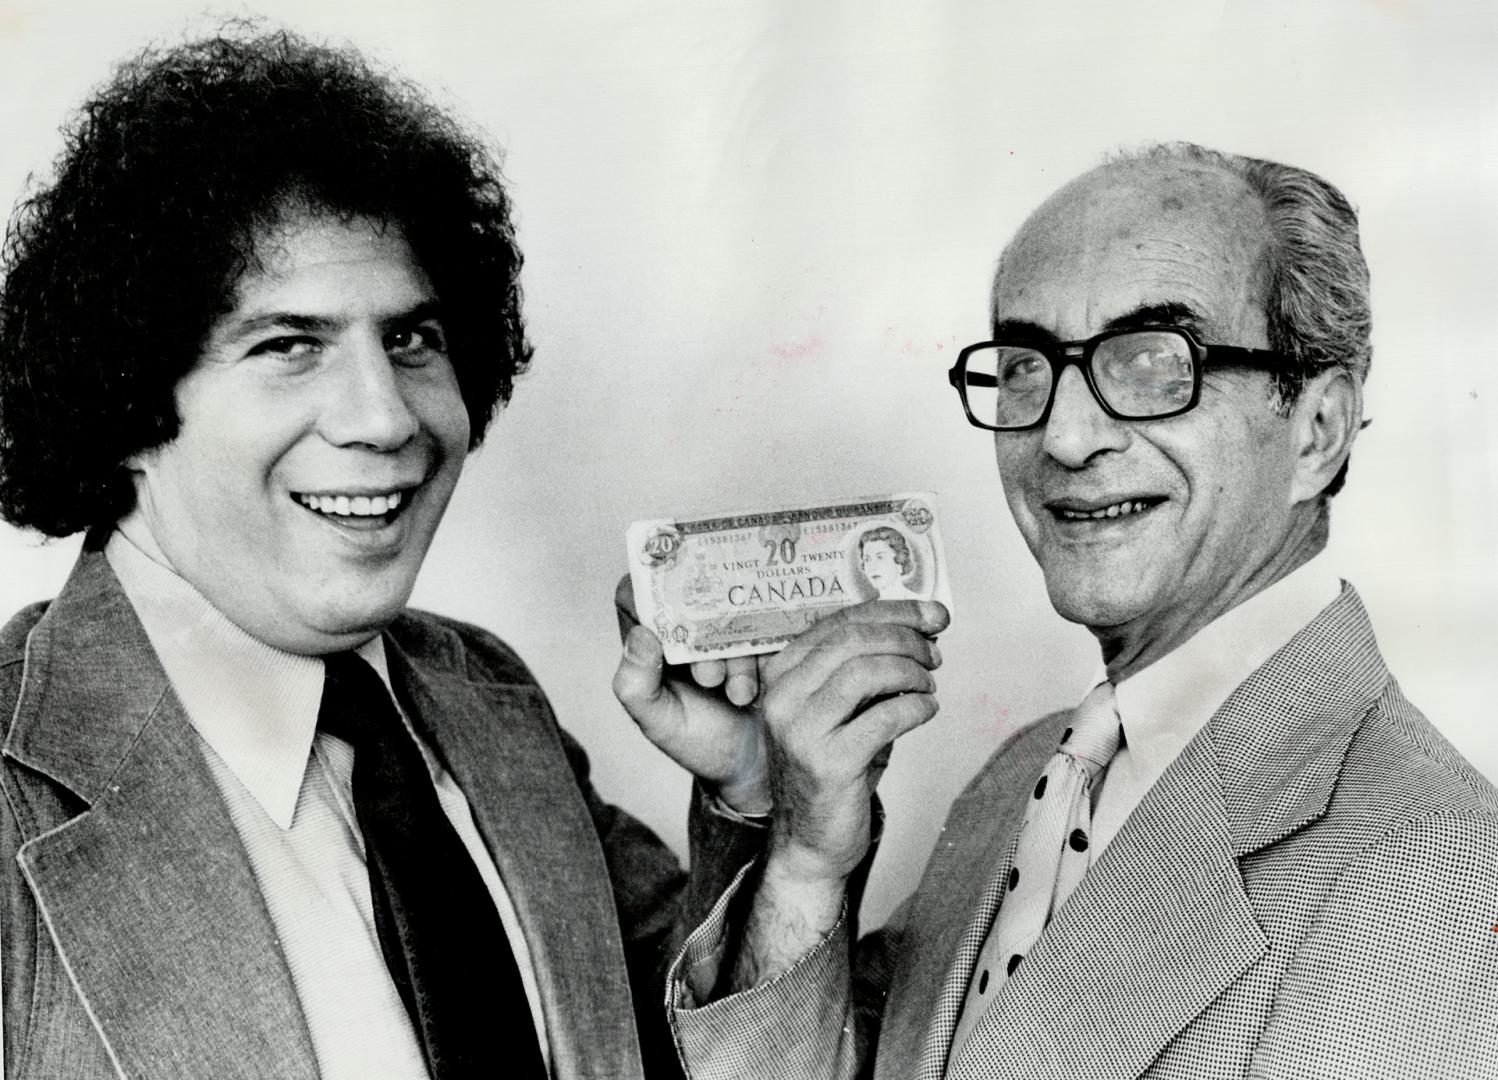 George Newman and his son, also George, hold a $20 bill, which is all they had when they came to Toronto from Hungary in 1956